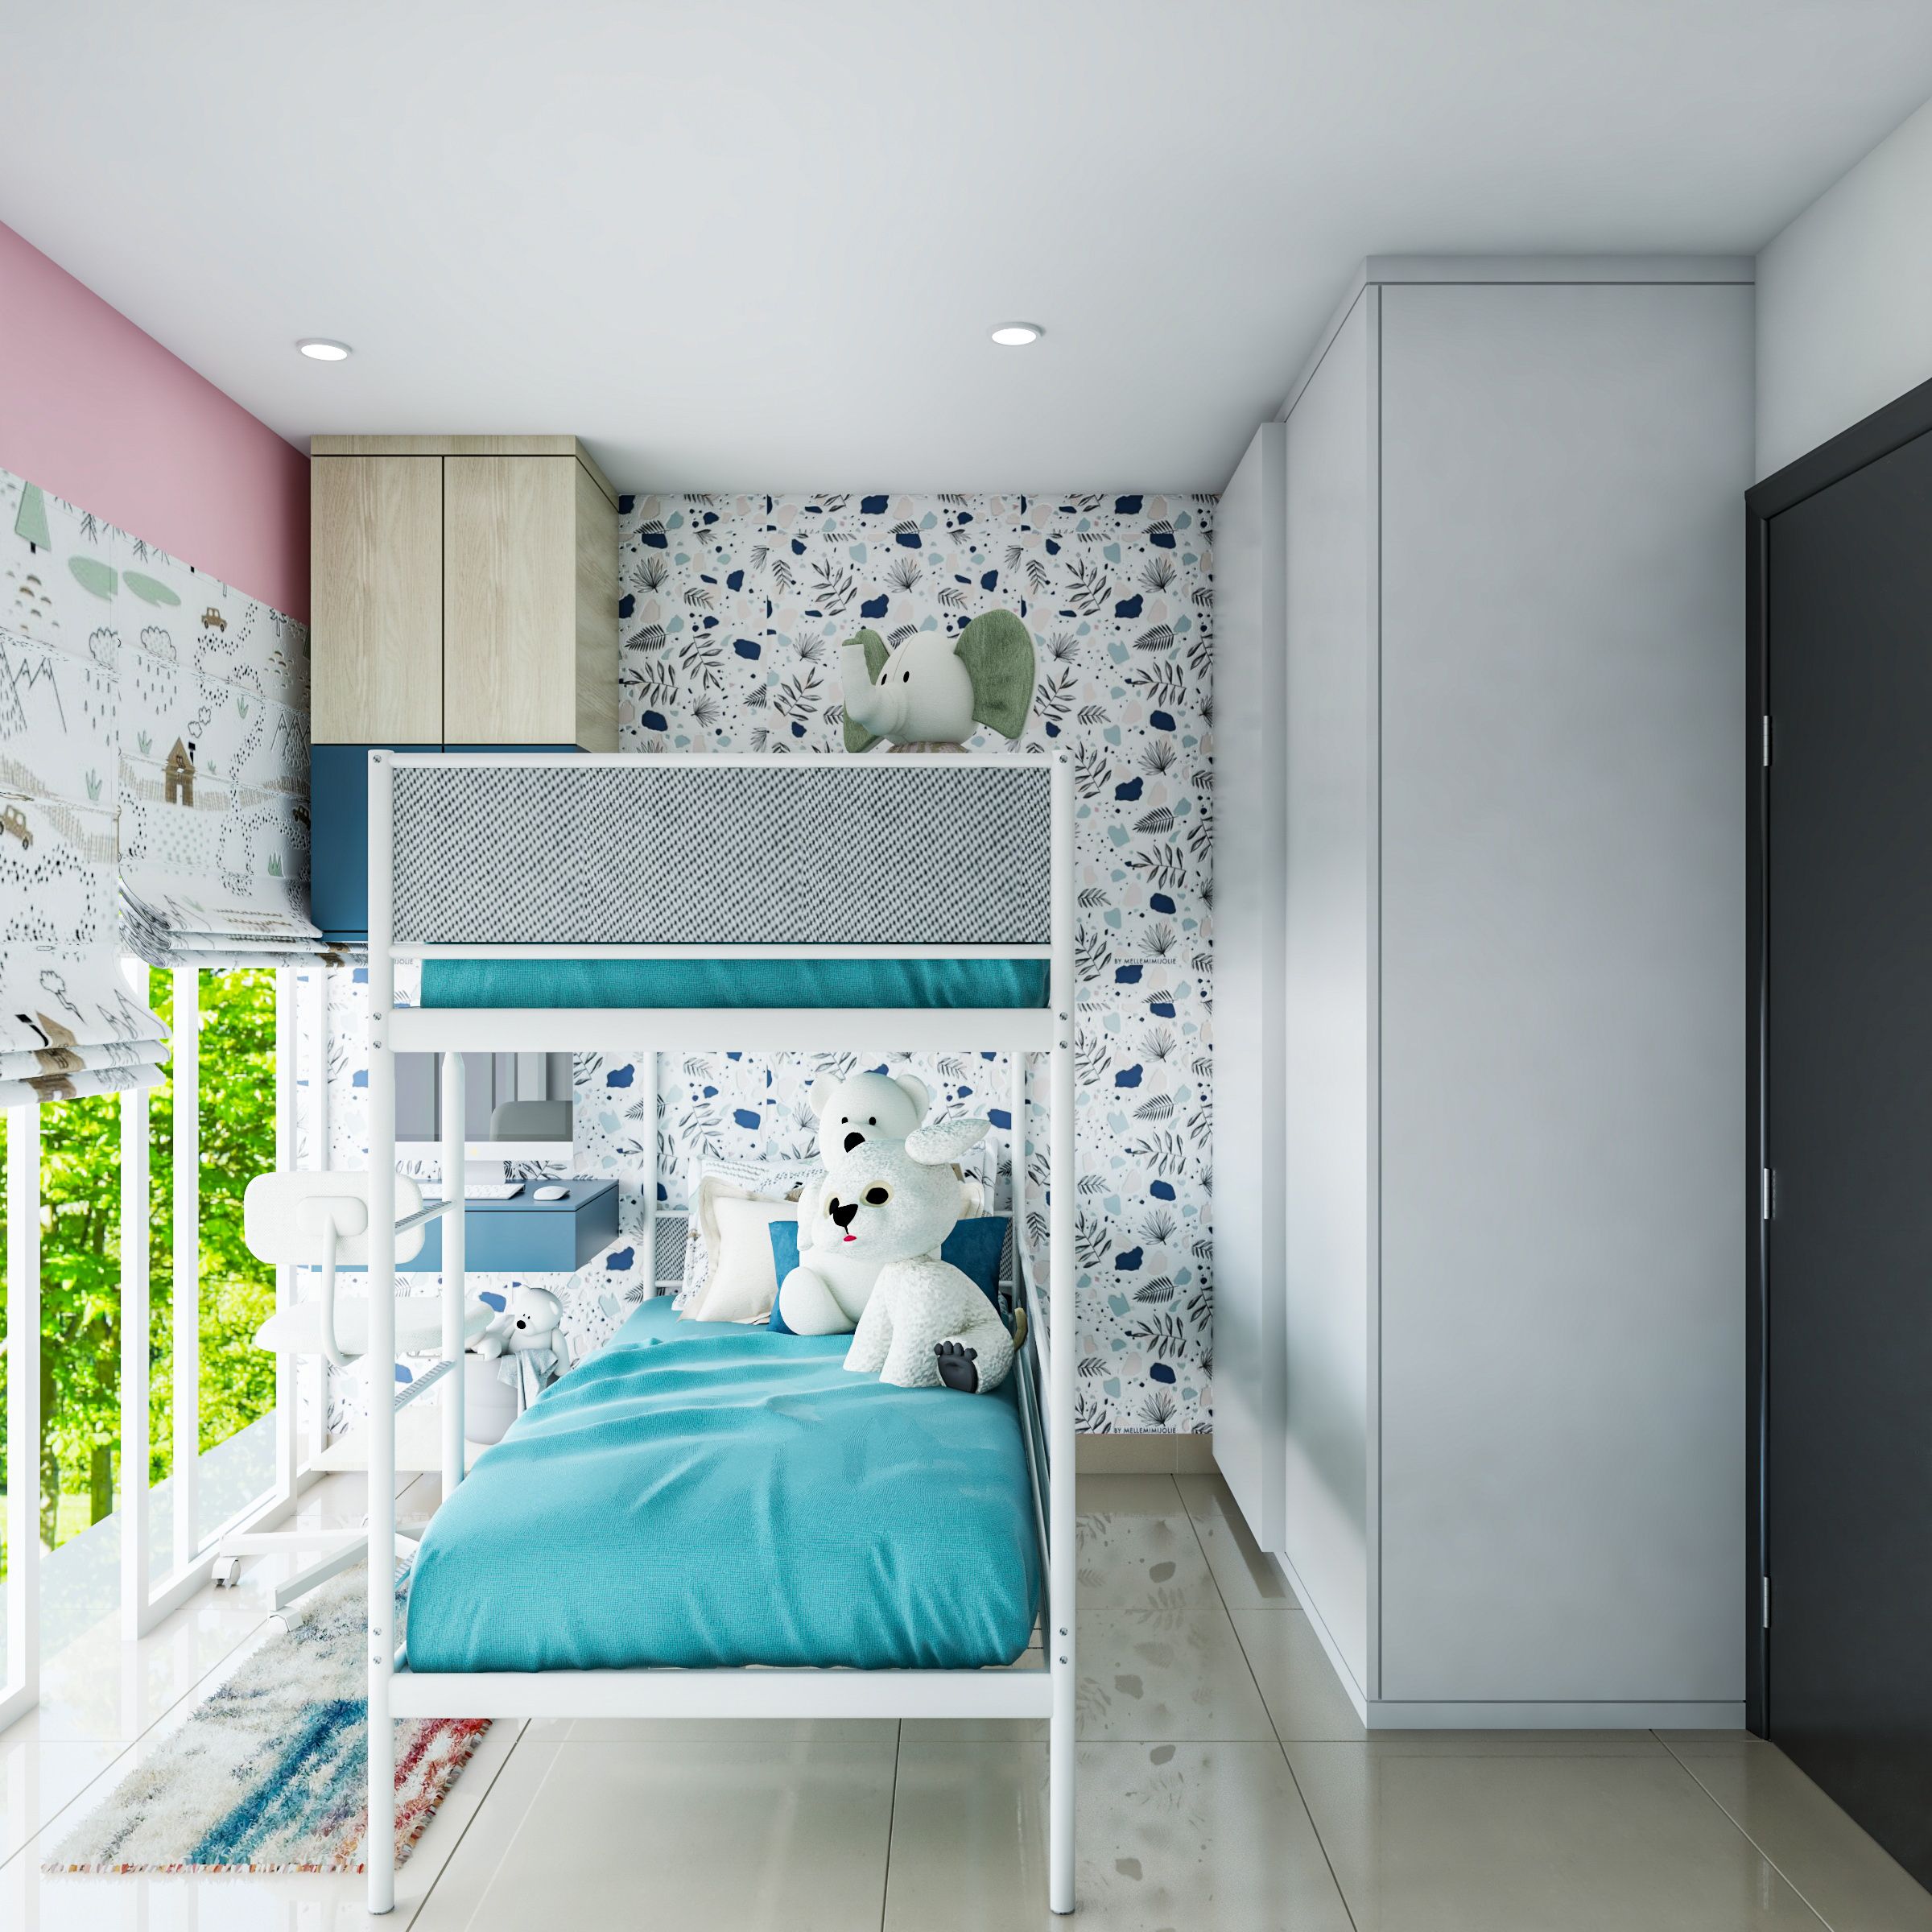 Modern Kid's Bedroom Design With Blue Bunk Beds And Patterned Wallpaper